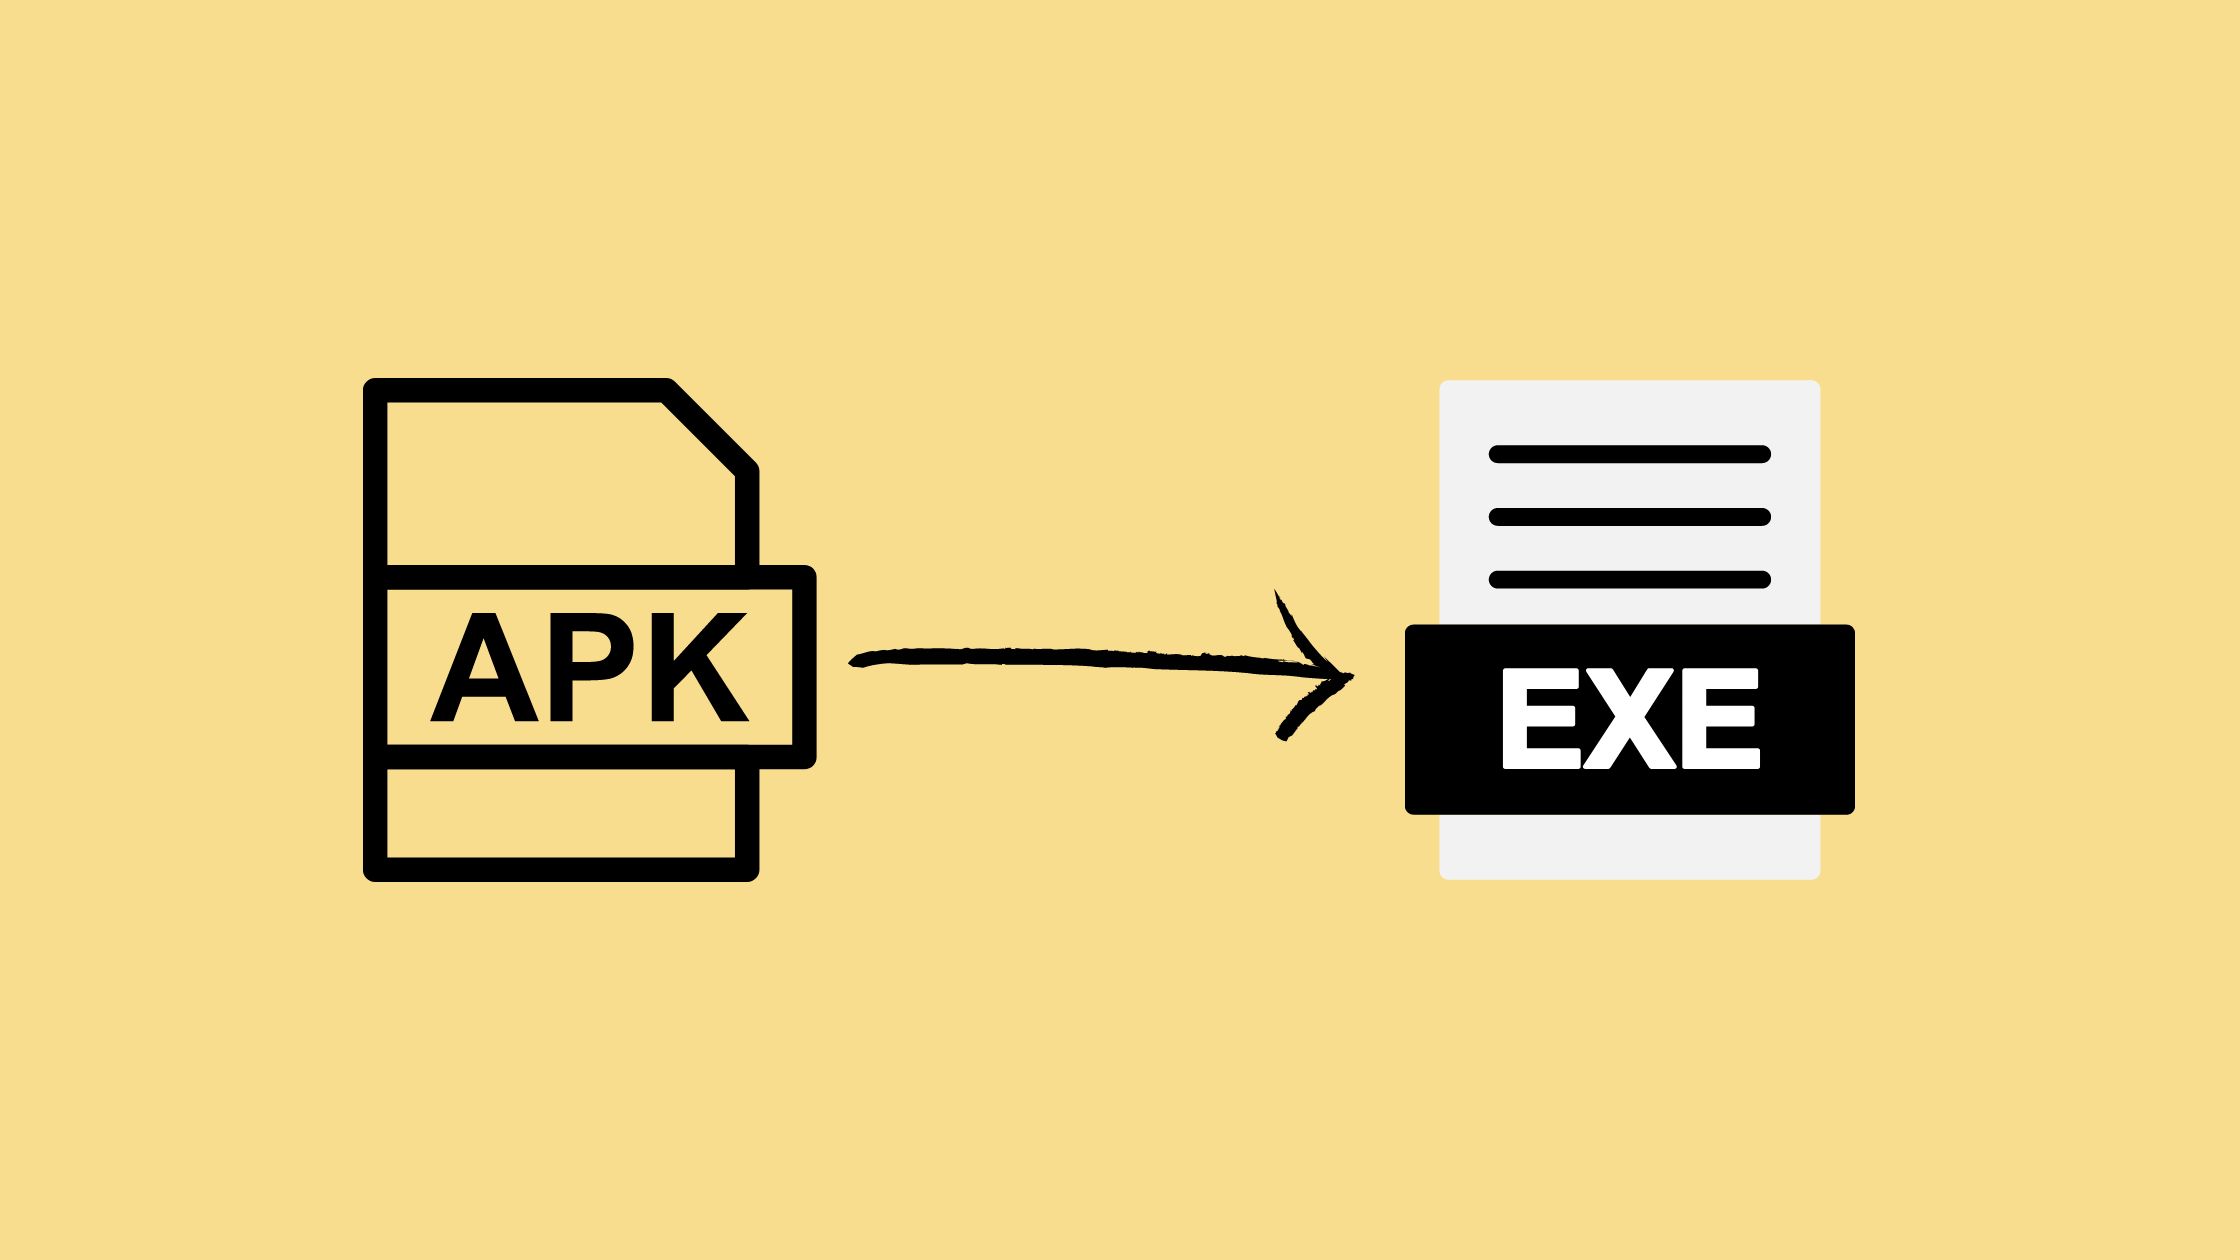 How to Change Apk File to EXE